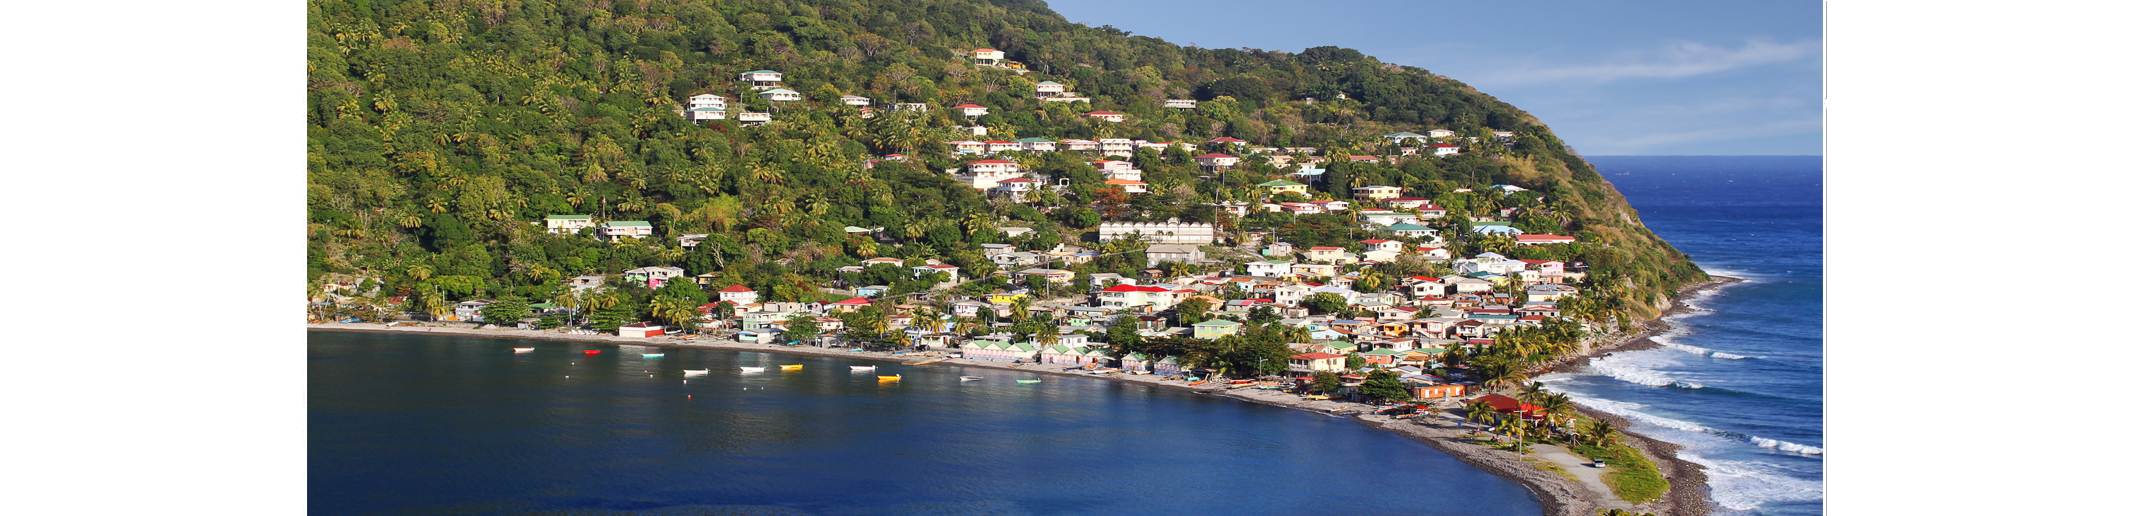 Dominica benefits from the extension of the debt service suspension initiative